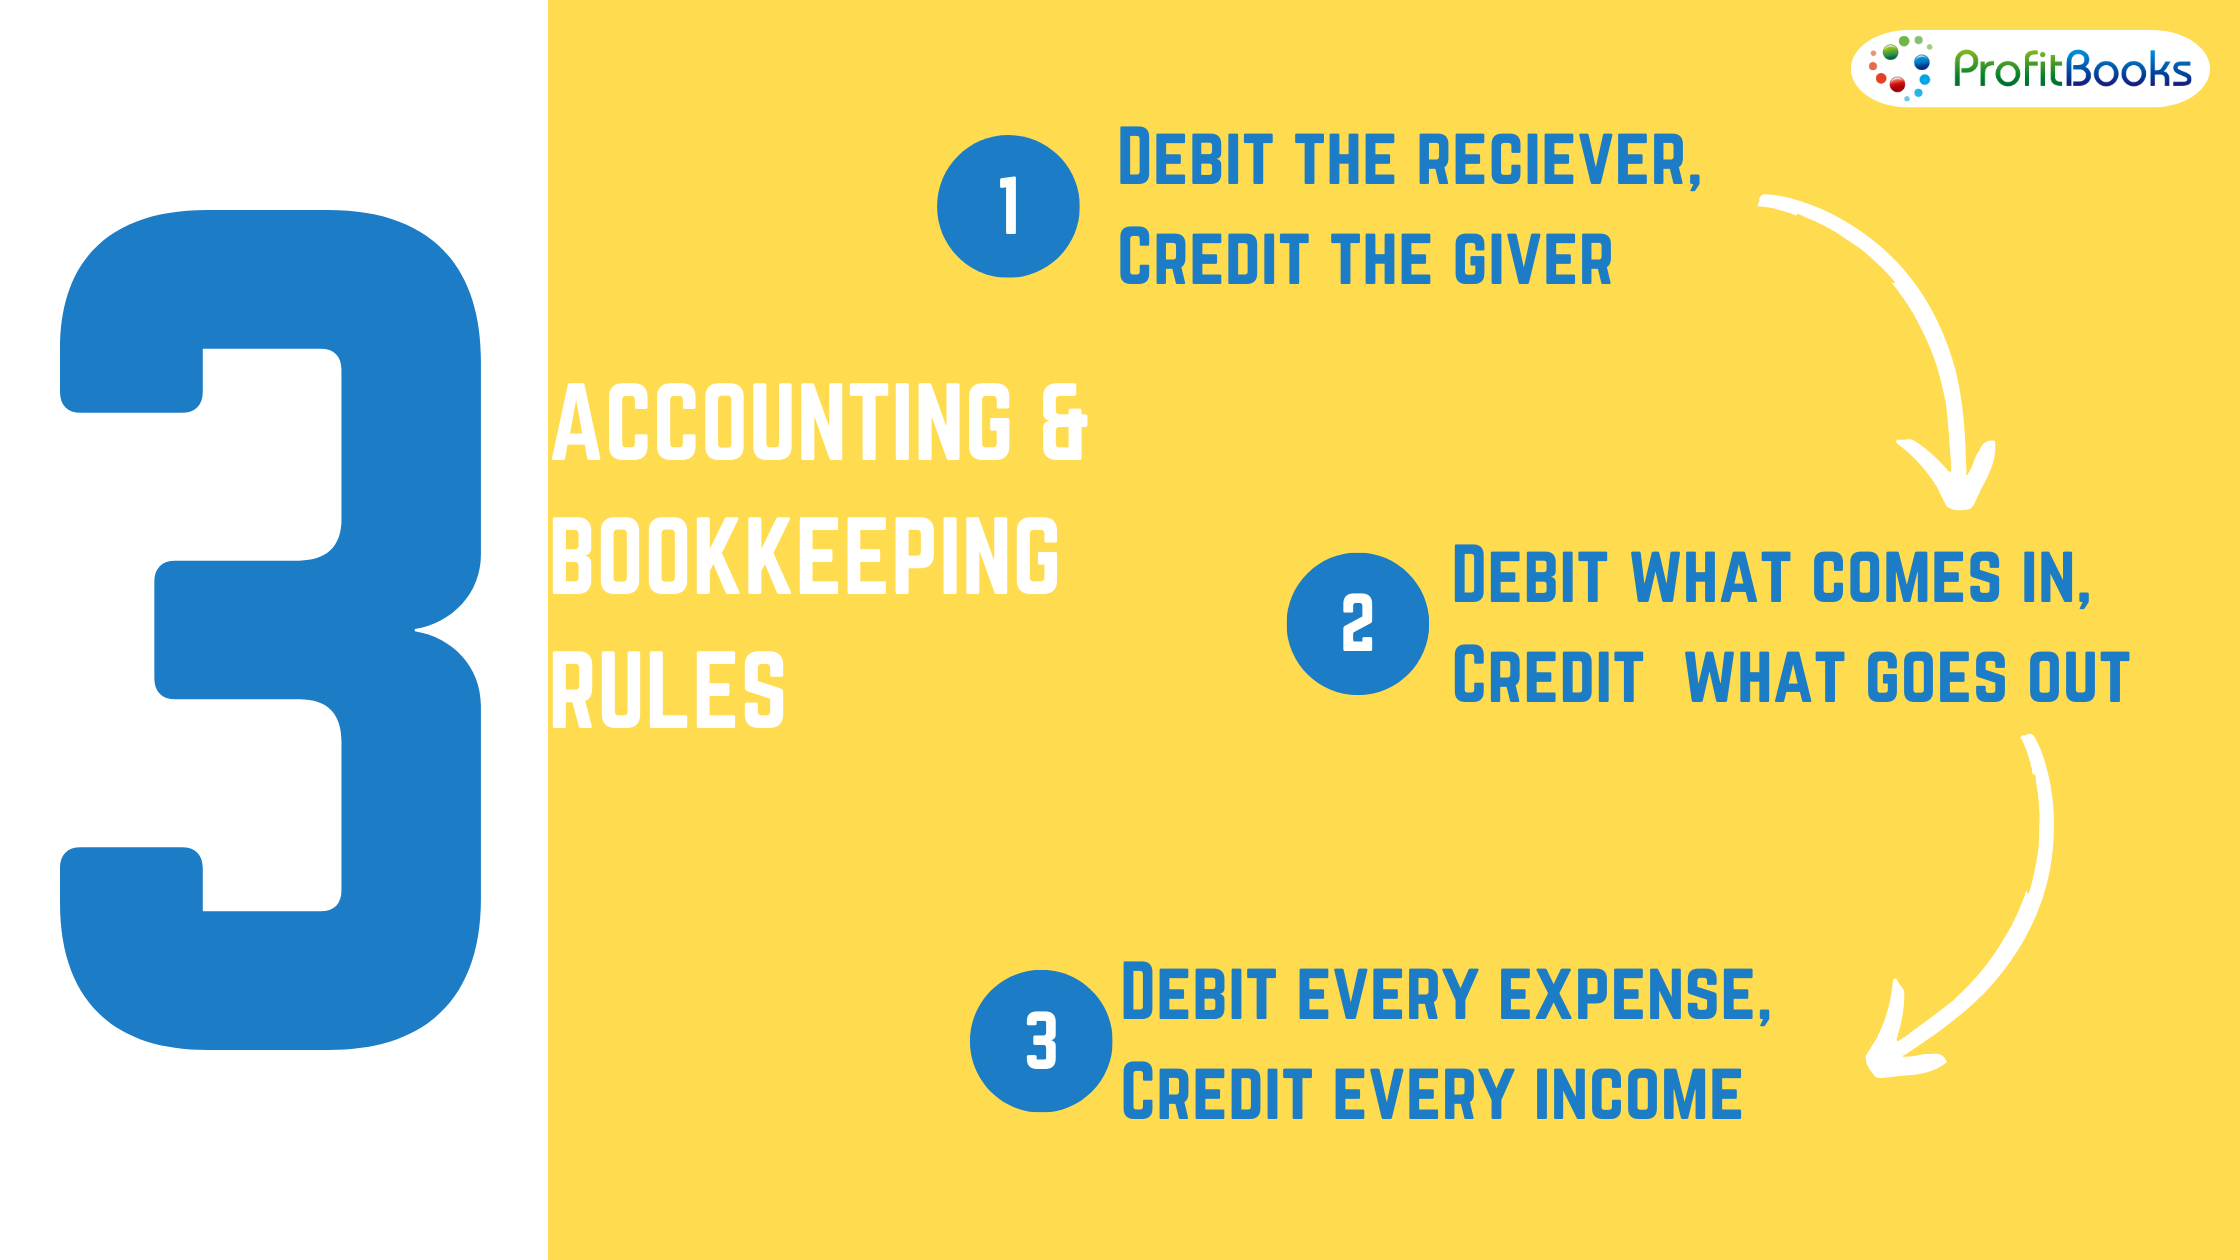 3 Accounting & Bookkeeping Rules